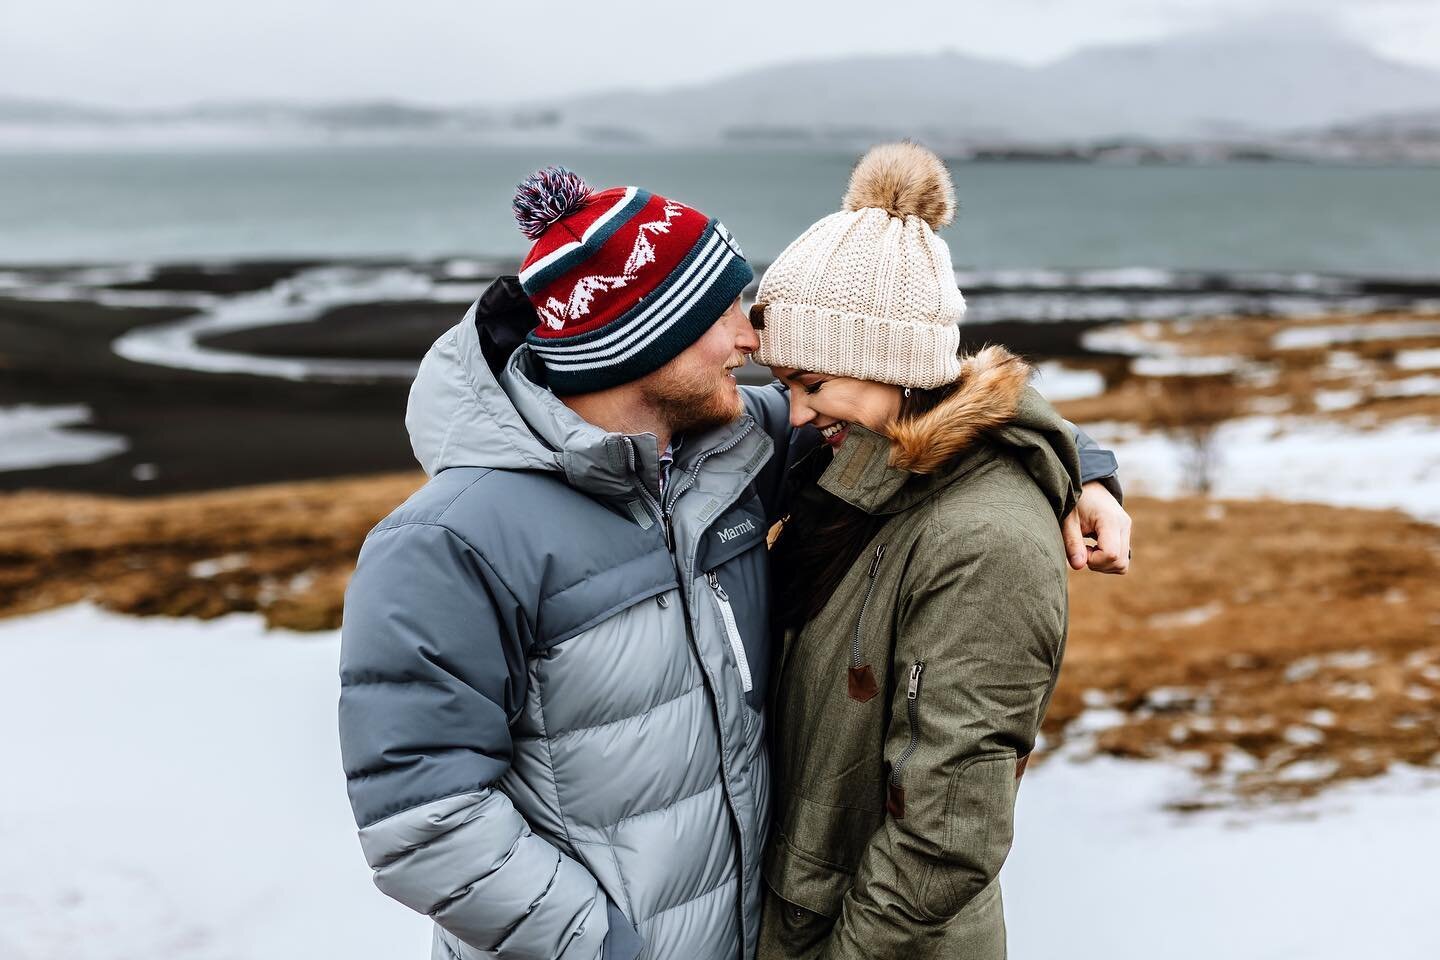 Donald and I had our photos taken while in Iceland, and I am just so happy we did! We had no special reason (other than visiting Iceland), but it was &ldquo;just because.&rdquo; I am so thankful Bettina was able to fit us into her busy schedule, and 